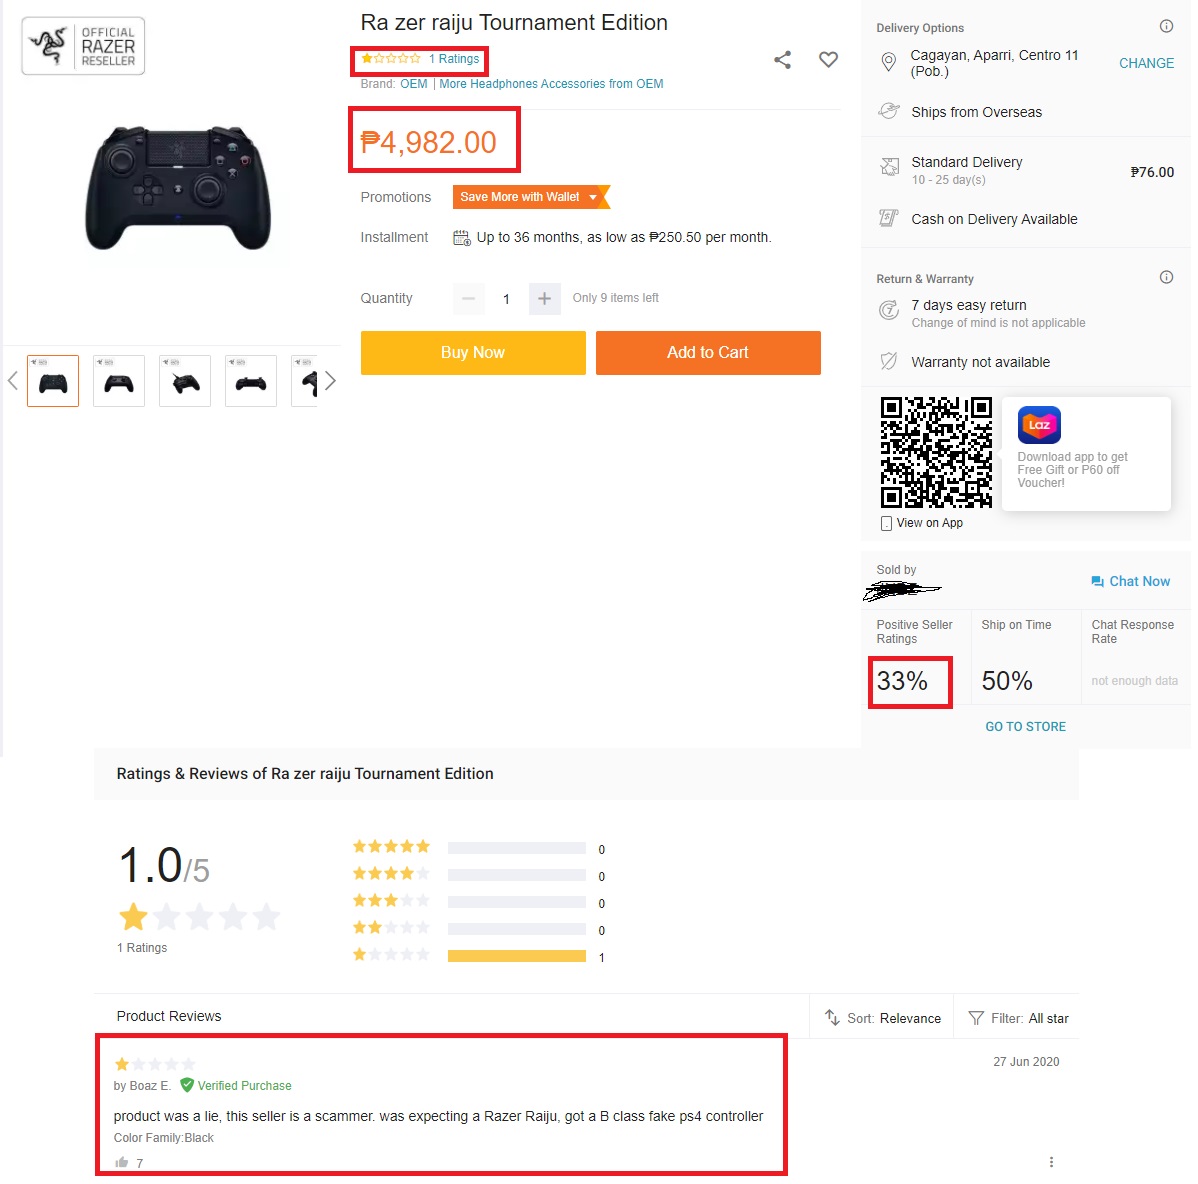 How To Know If An Item is Fake or Counterfeit (Lazada & Shoppee) - returnal